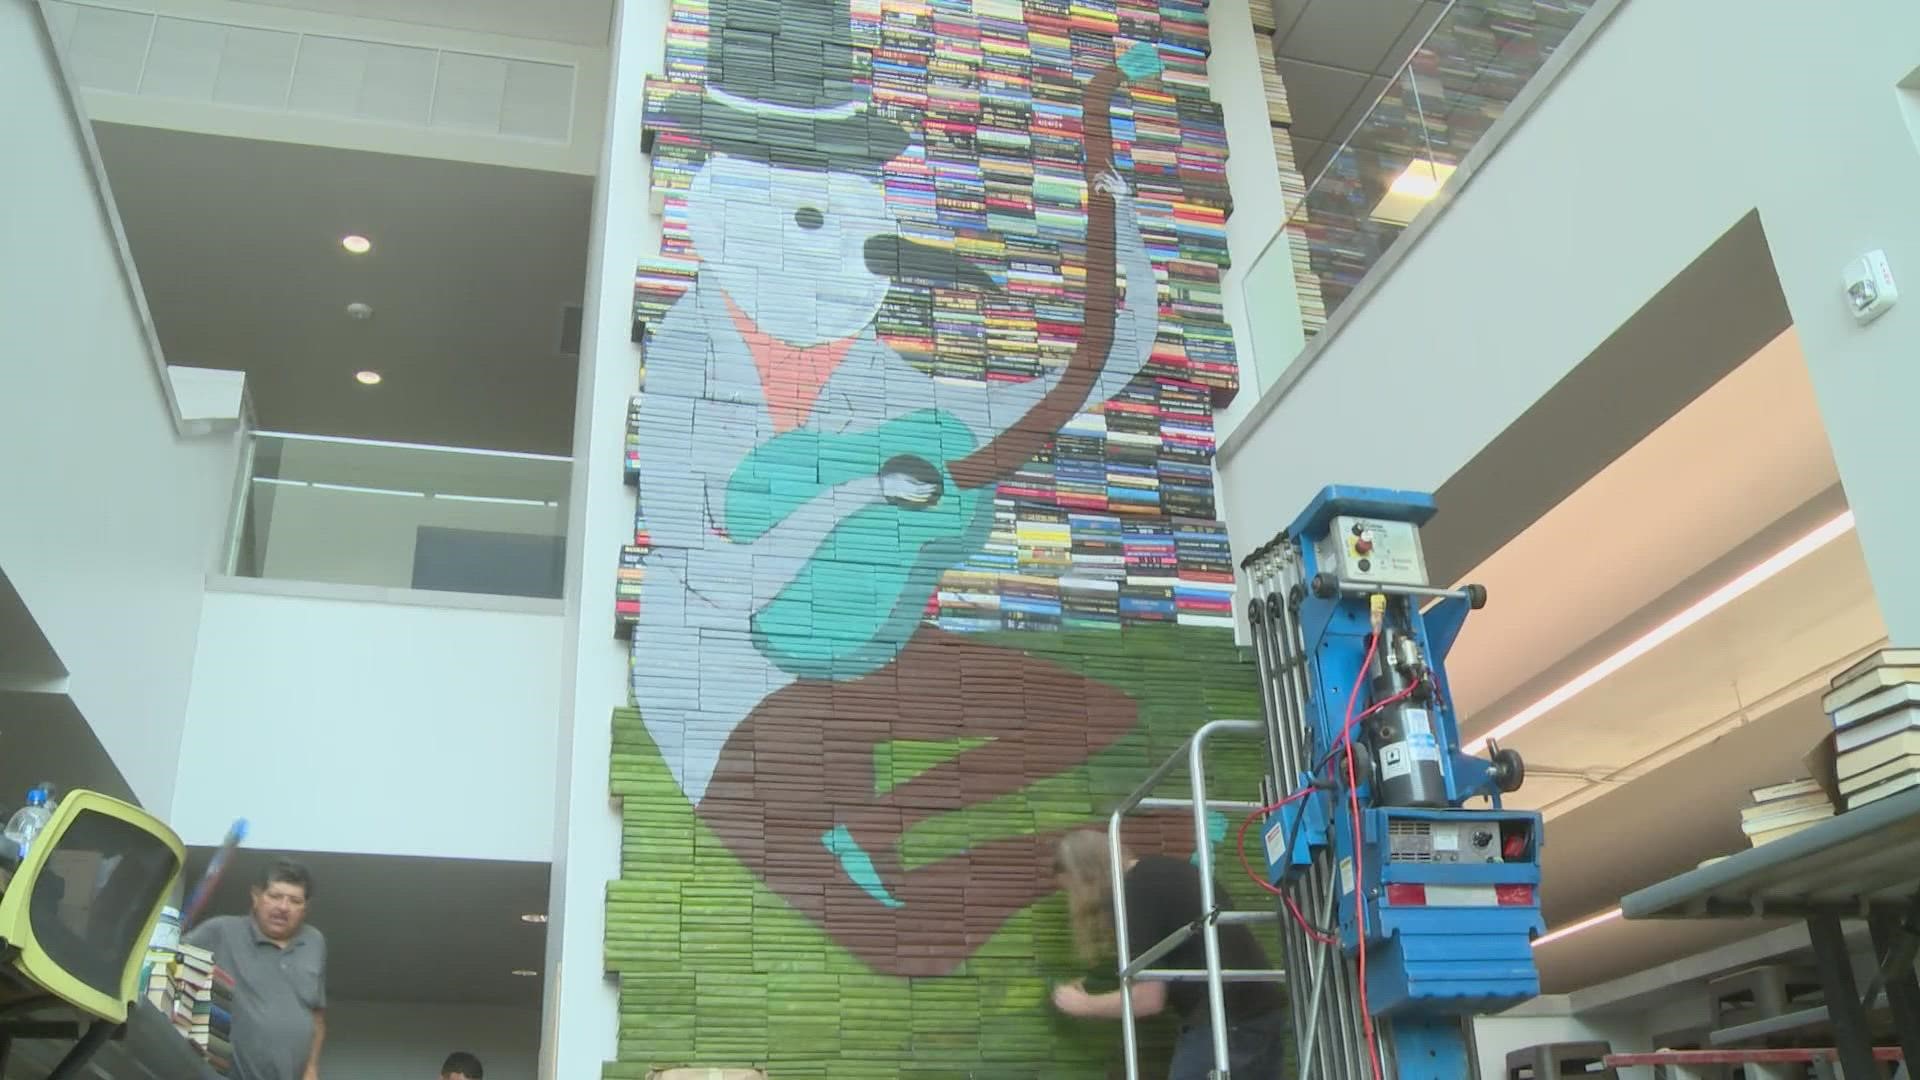 Farmers Branch is reinventing what the local library means to its community.